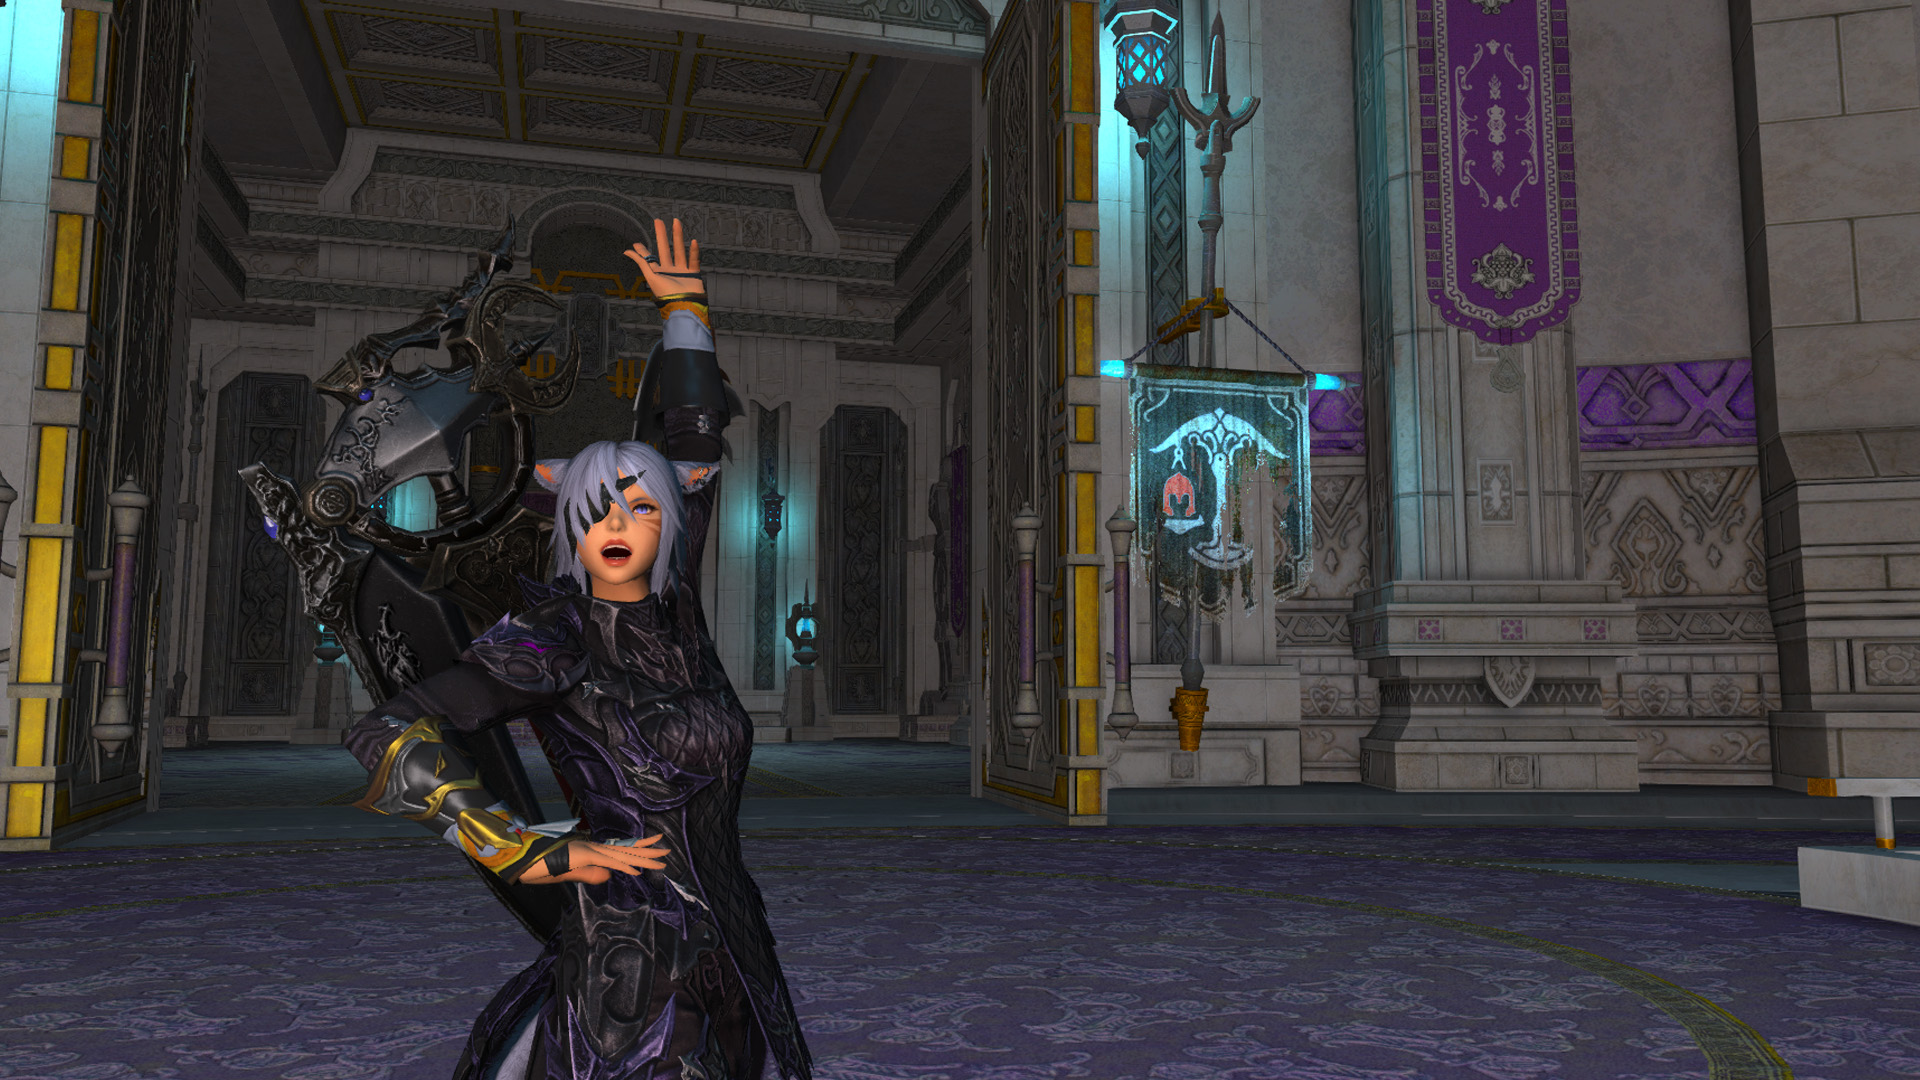 A player’s character stands in front of the entrance to a Variant Dungeon in Final Fantasy XIV.